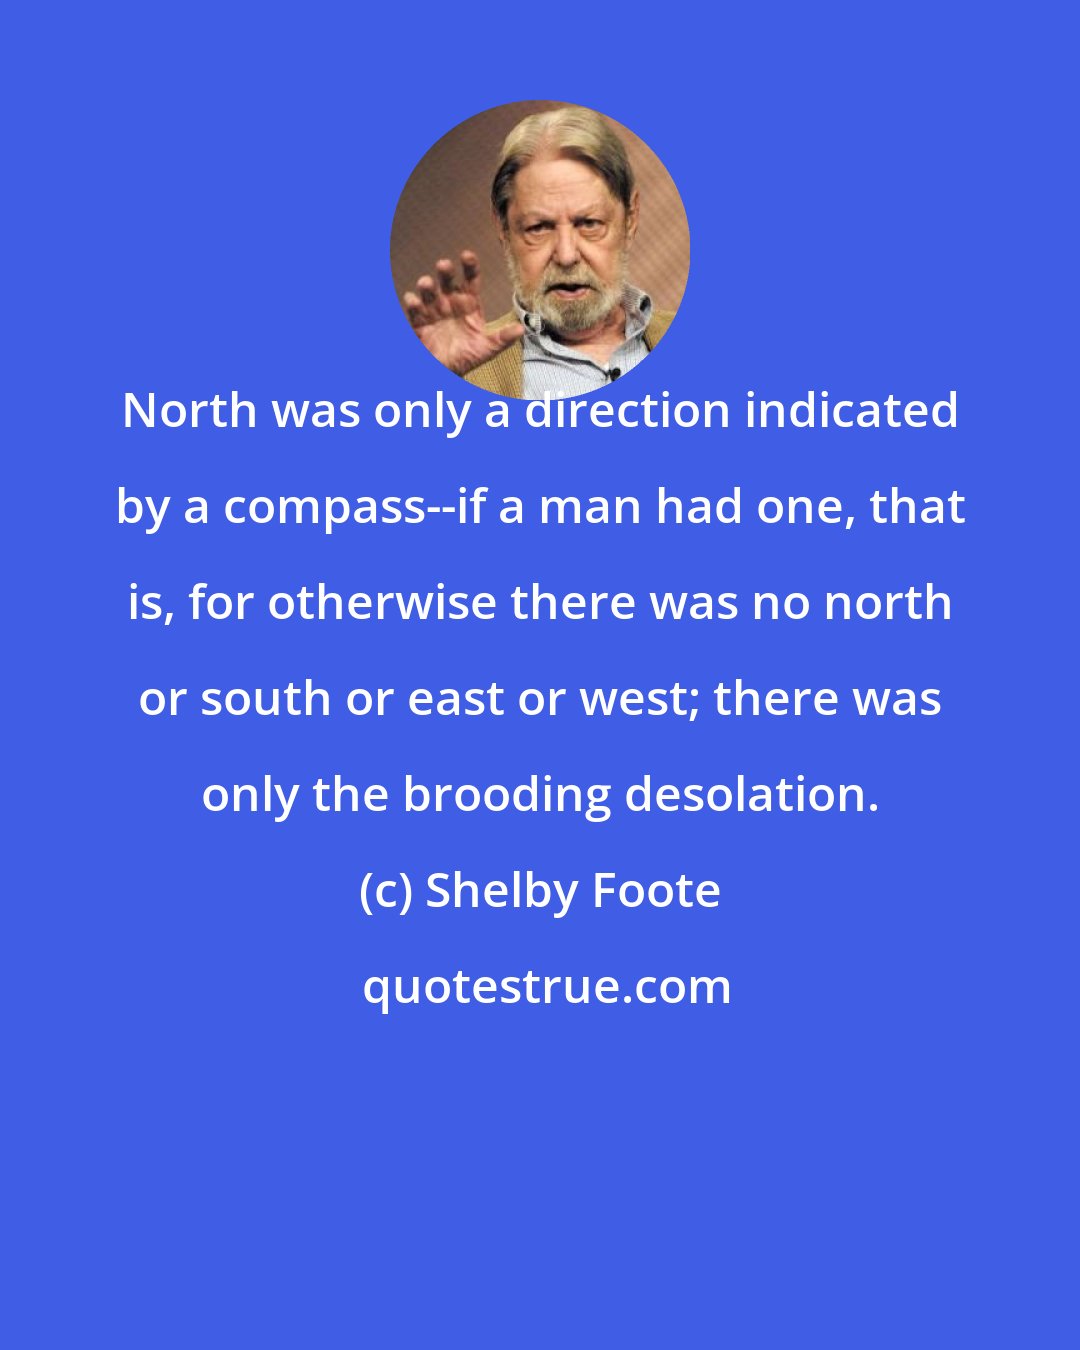 Shelby Foote: North was only a direction indicated by a compass--if a man had one, that is, for otherwise there was no north or south or east or west; there was only the brooding desolation.